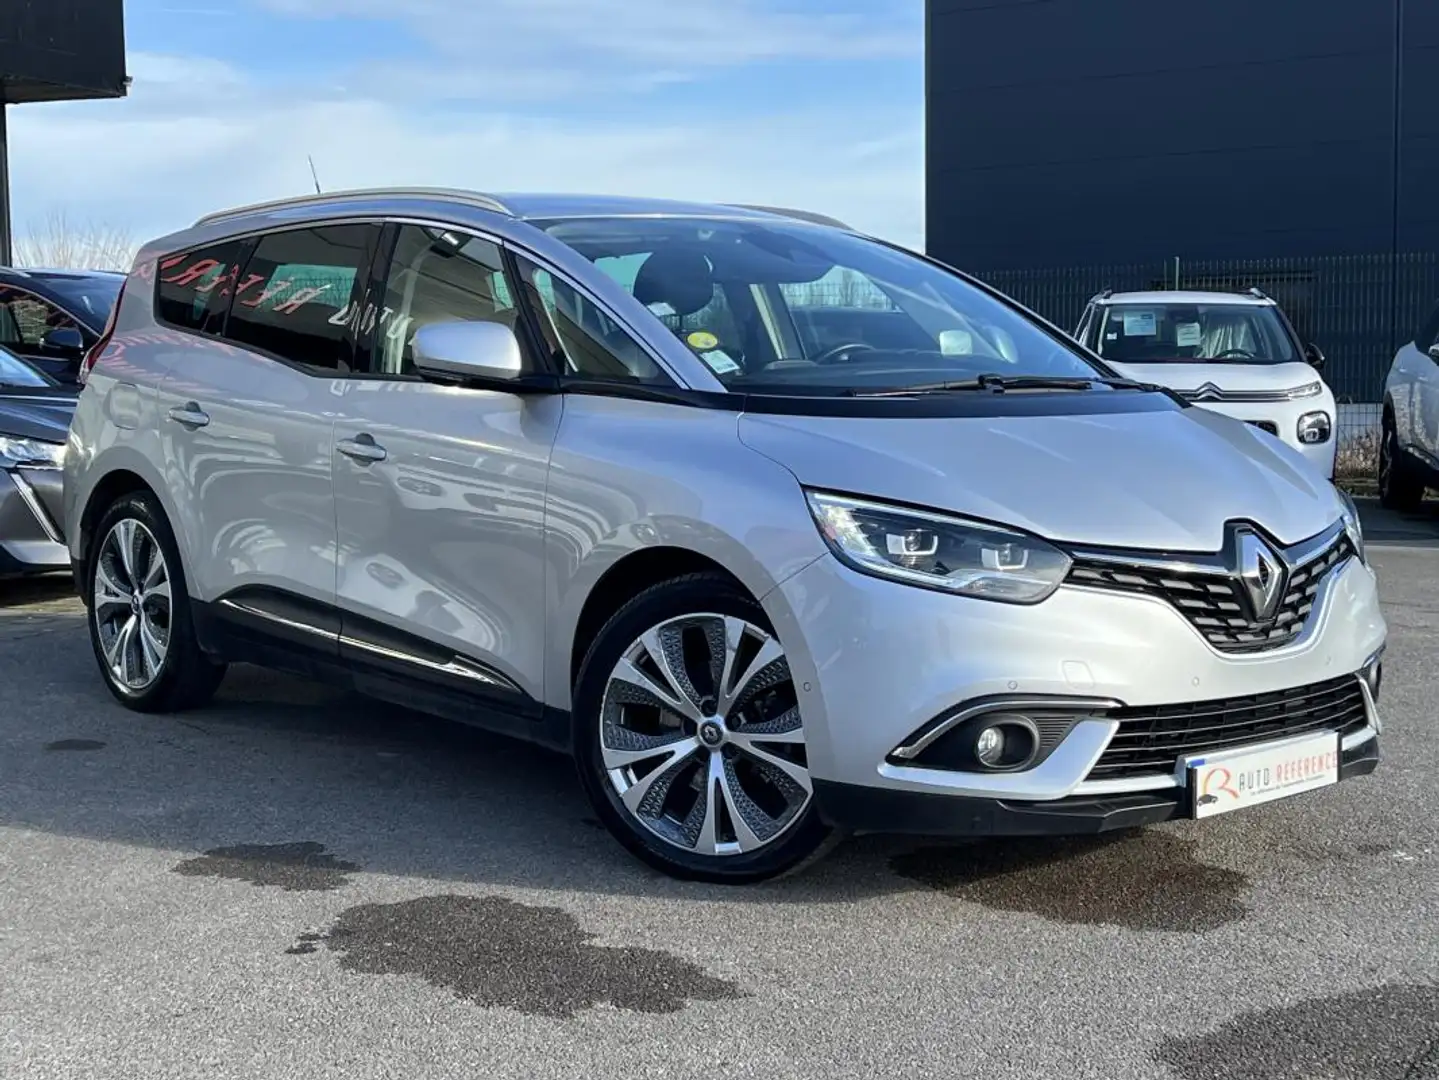 Renault Grand Scenic 1.6 dCi 130 Ch 7 PLACES INTENS CAMERA / TEL GPS Gris - 2